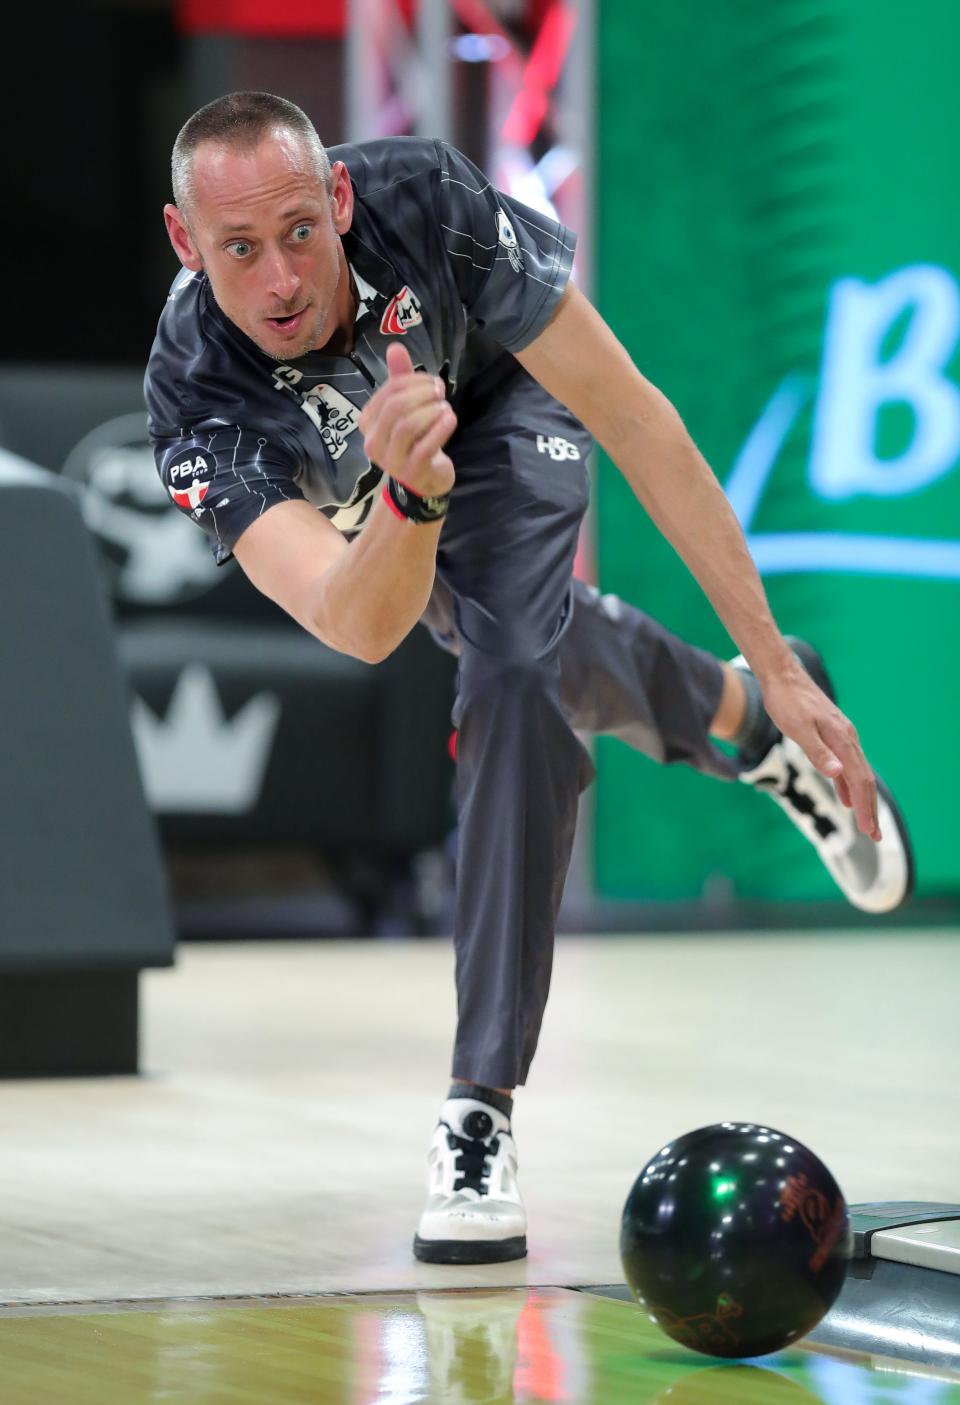 Matt Ogle competes against Marshall Kent during the PBA Tournament of Champions on Sunday.